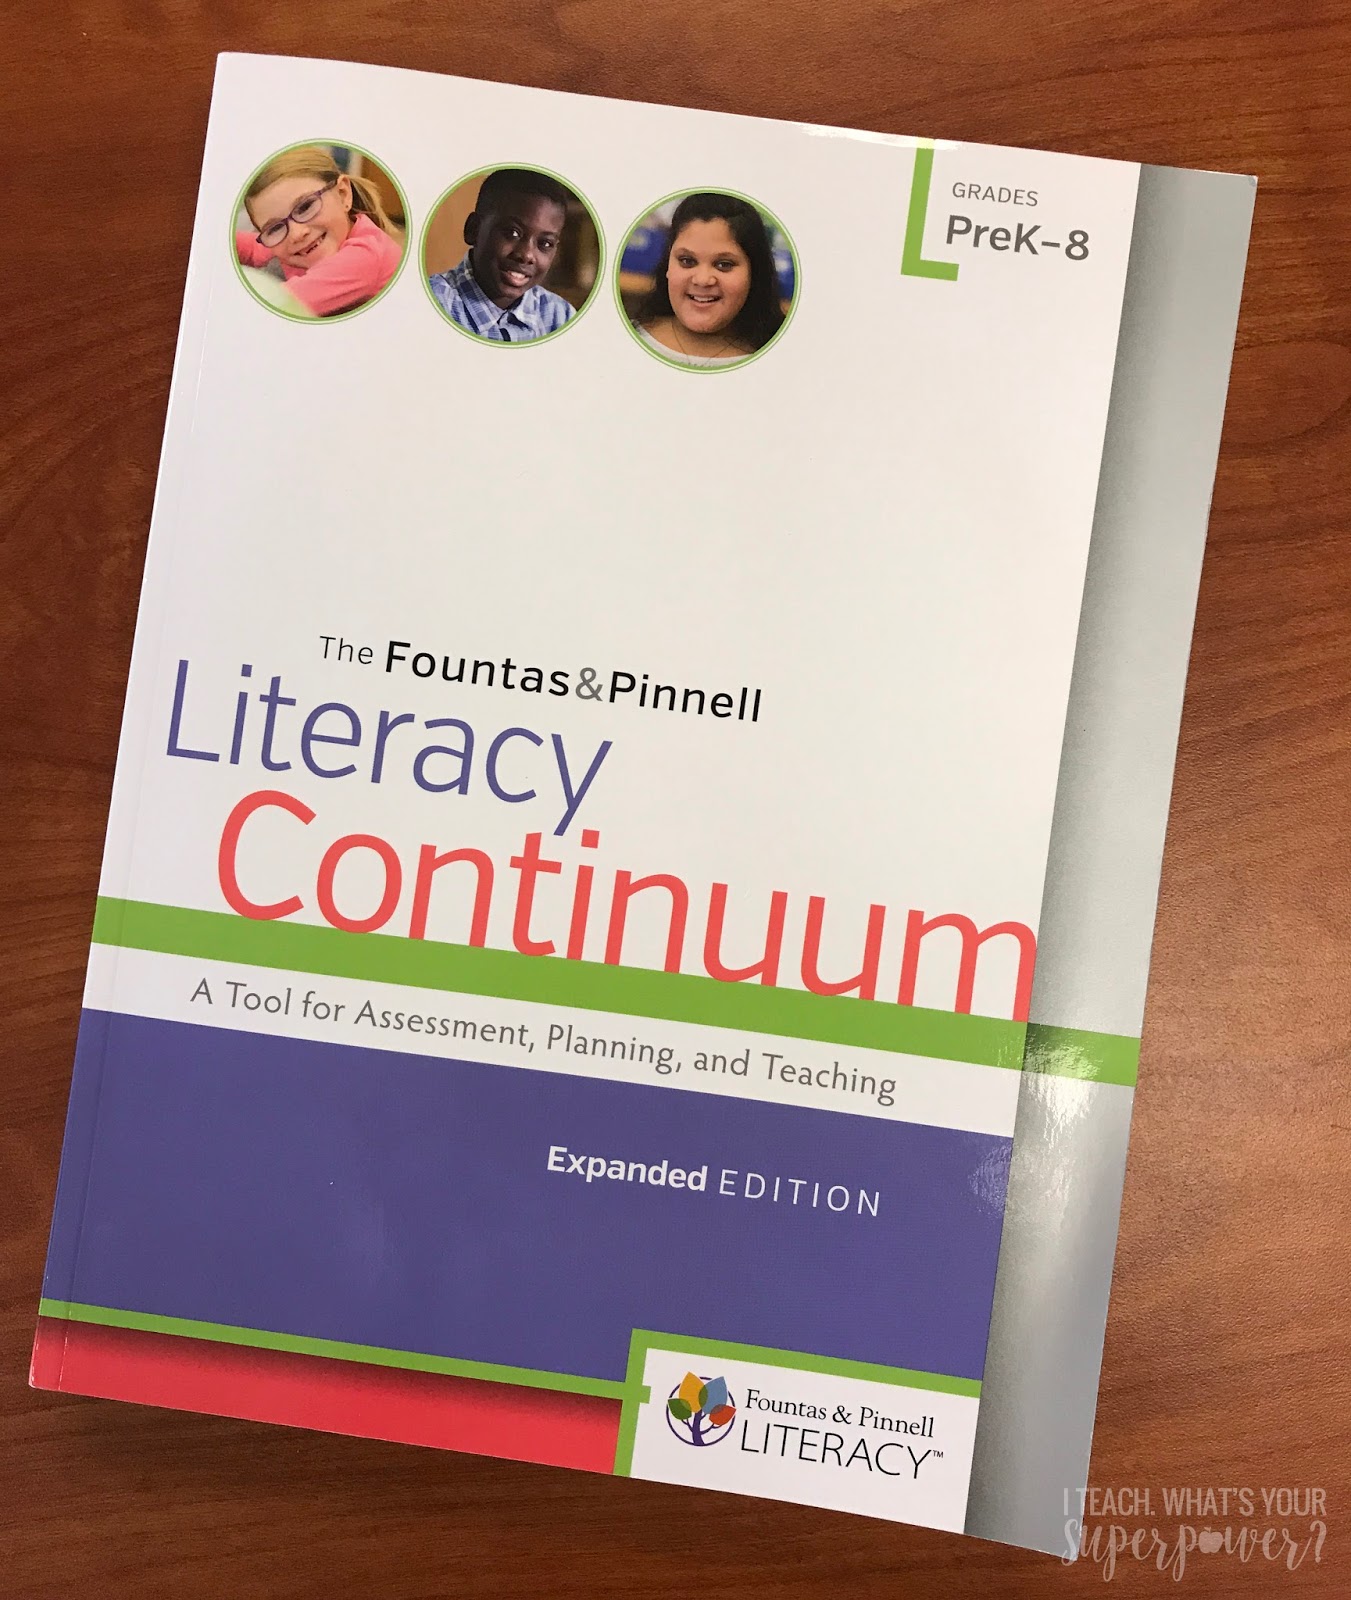 Awesome resource!! The description of each guided reading level is so thorough and detailed.